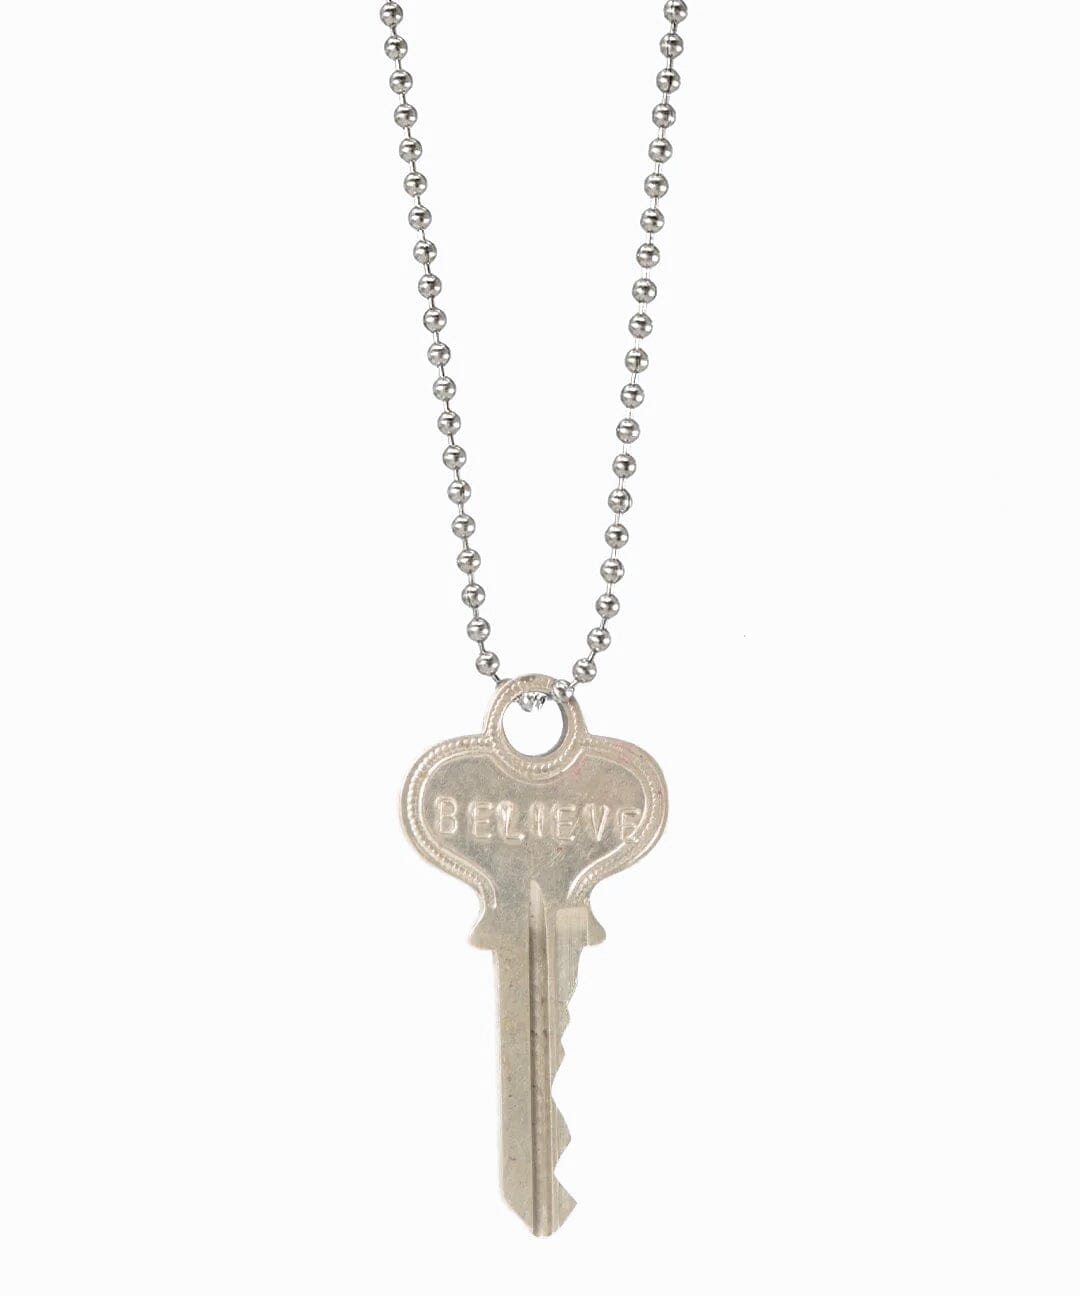 Learn more about the tradition of giving a key necklace - Bashert Jewelry